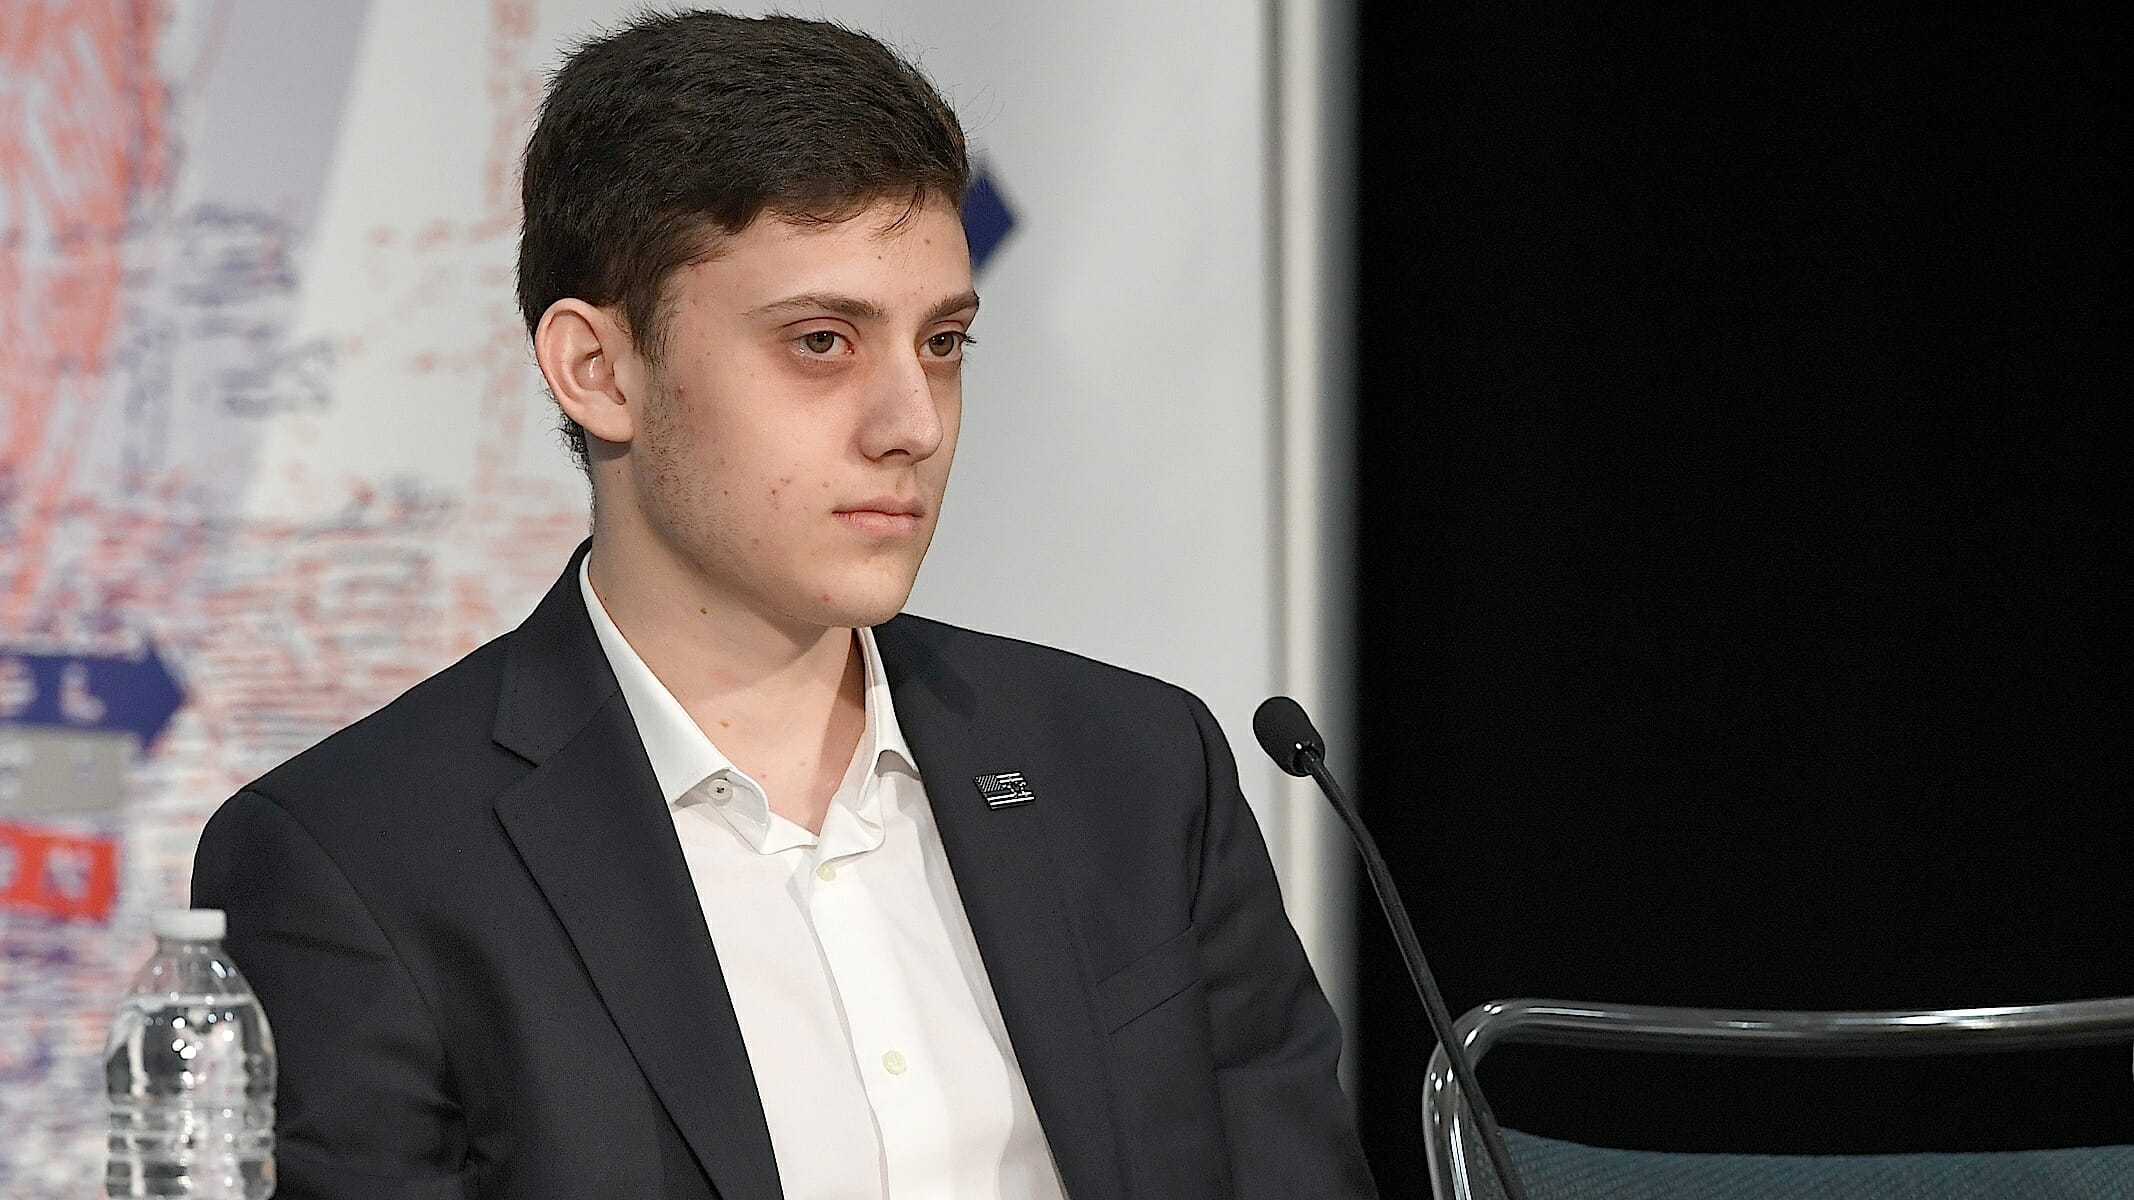 Harvard Rescinding Kyle Kashuv’s Admission Over Racist Texts Is a Sign of Much-Needed Growth